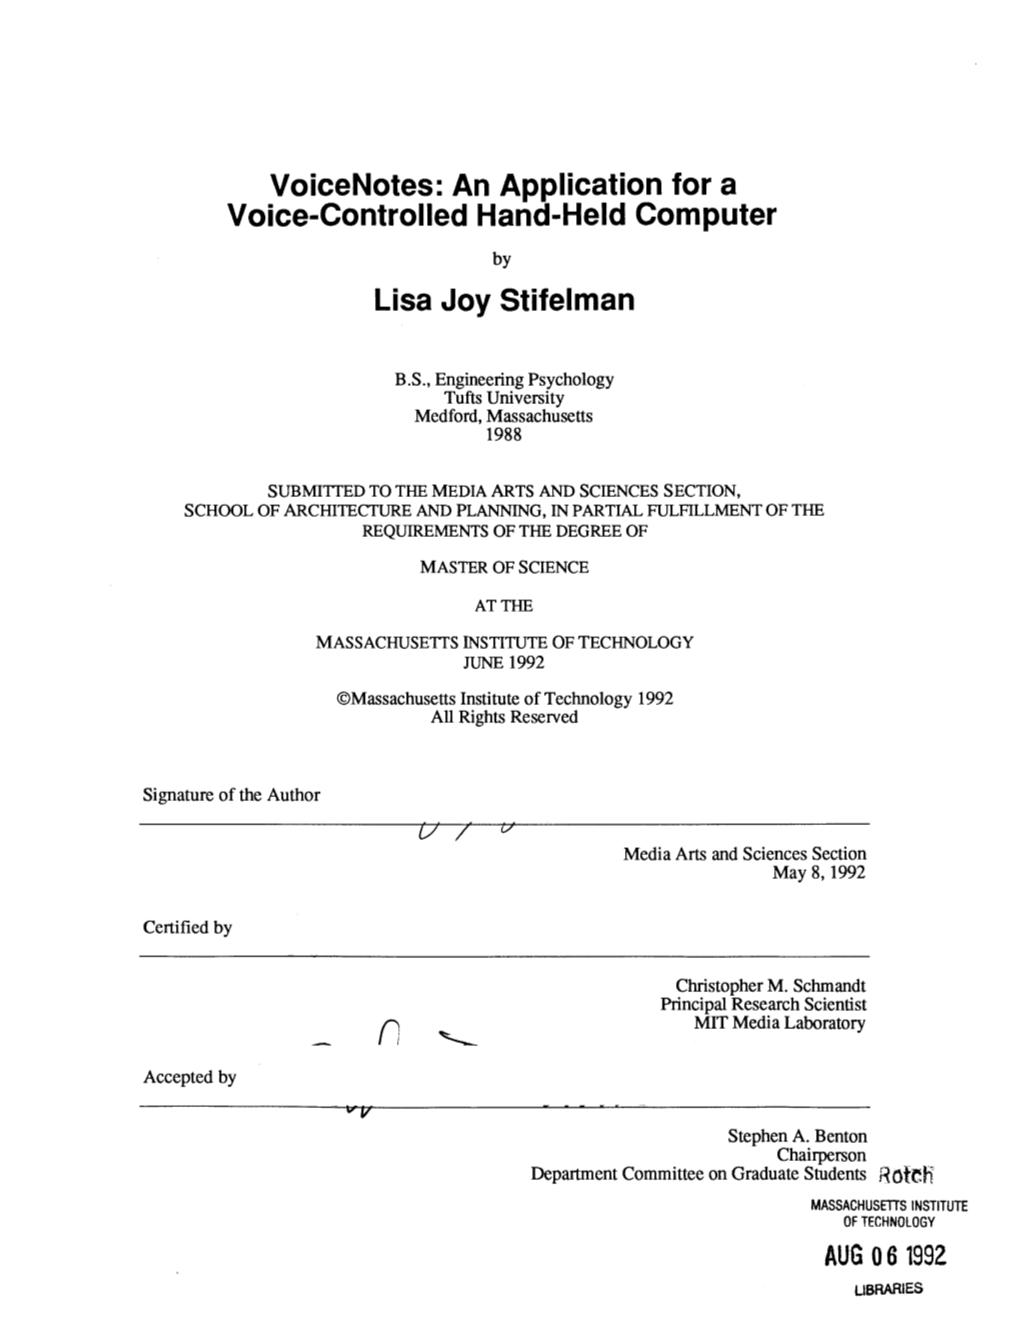 Voicenotes: an Application for a Voice-Controlled Hand-Held Computer by Lisa Joy Stifelman